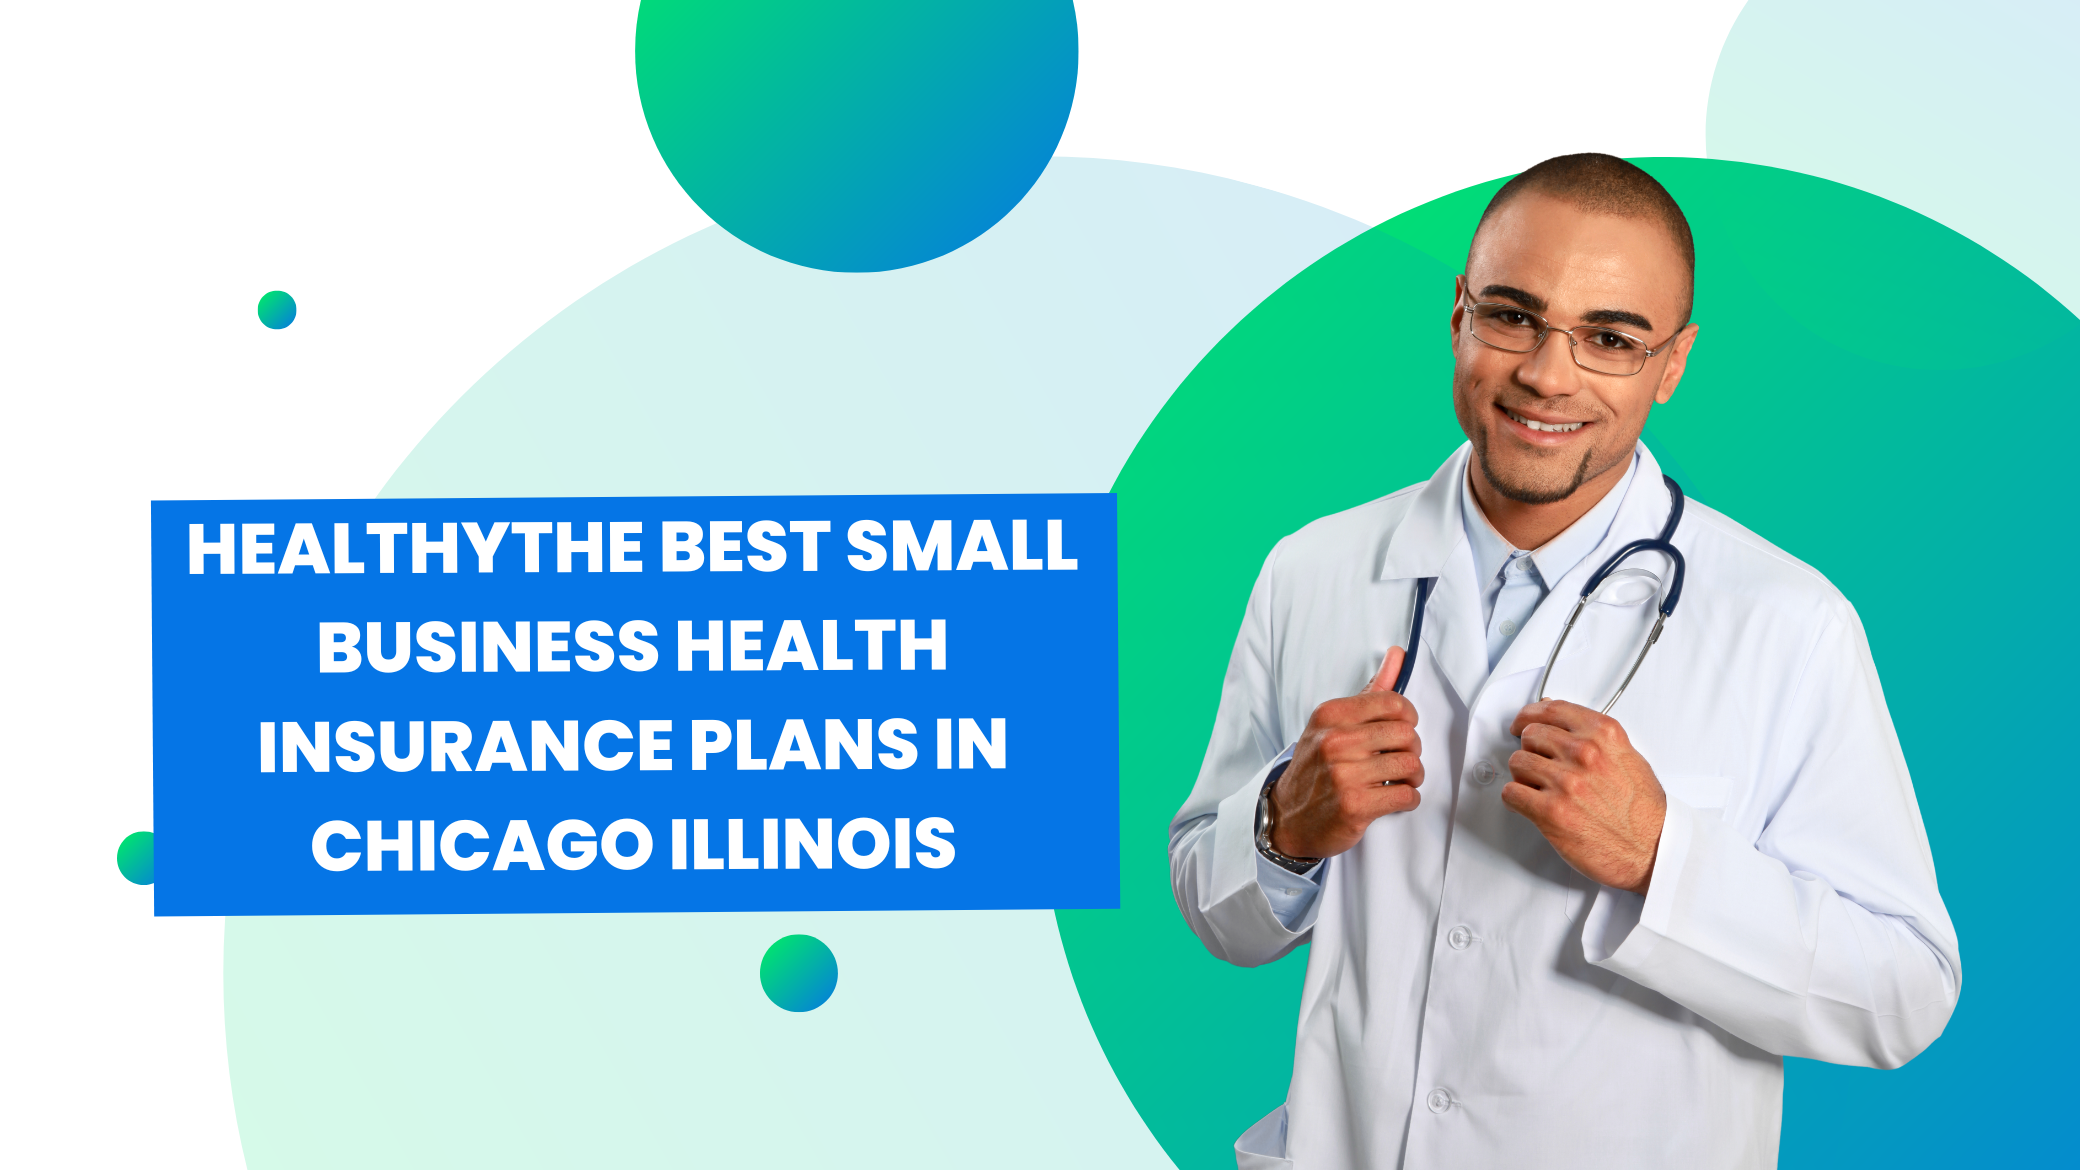 The Best Small Business Health Insurance Plans In Chicago Illinois